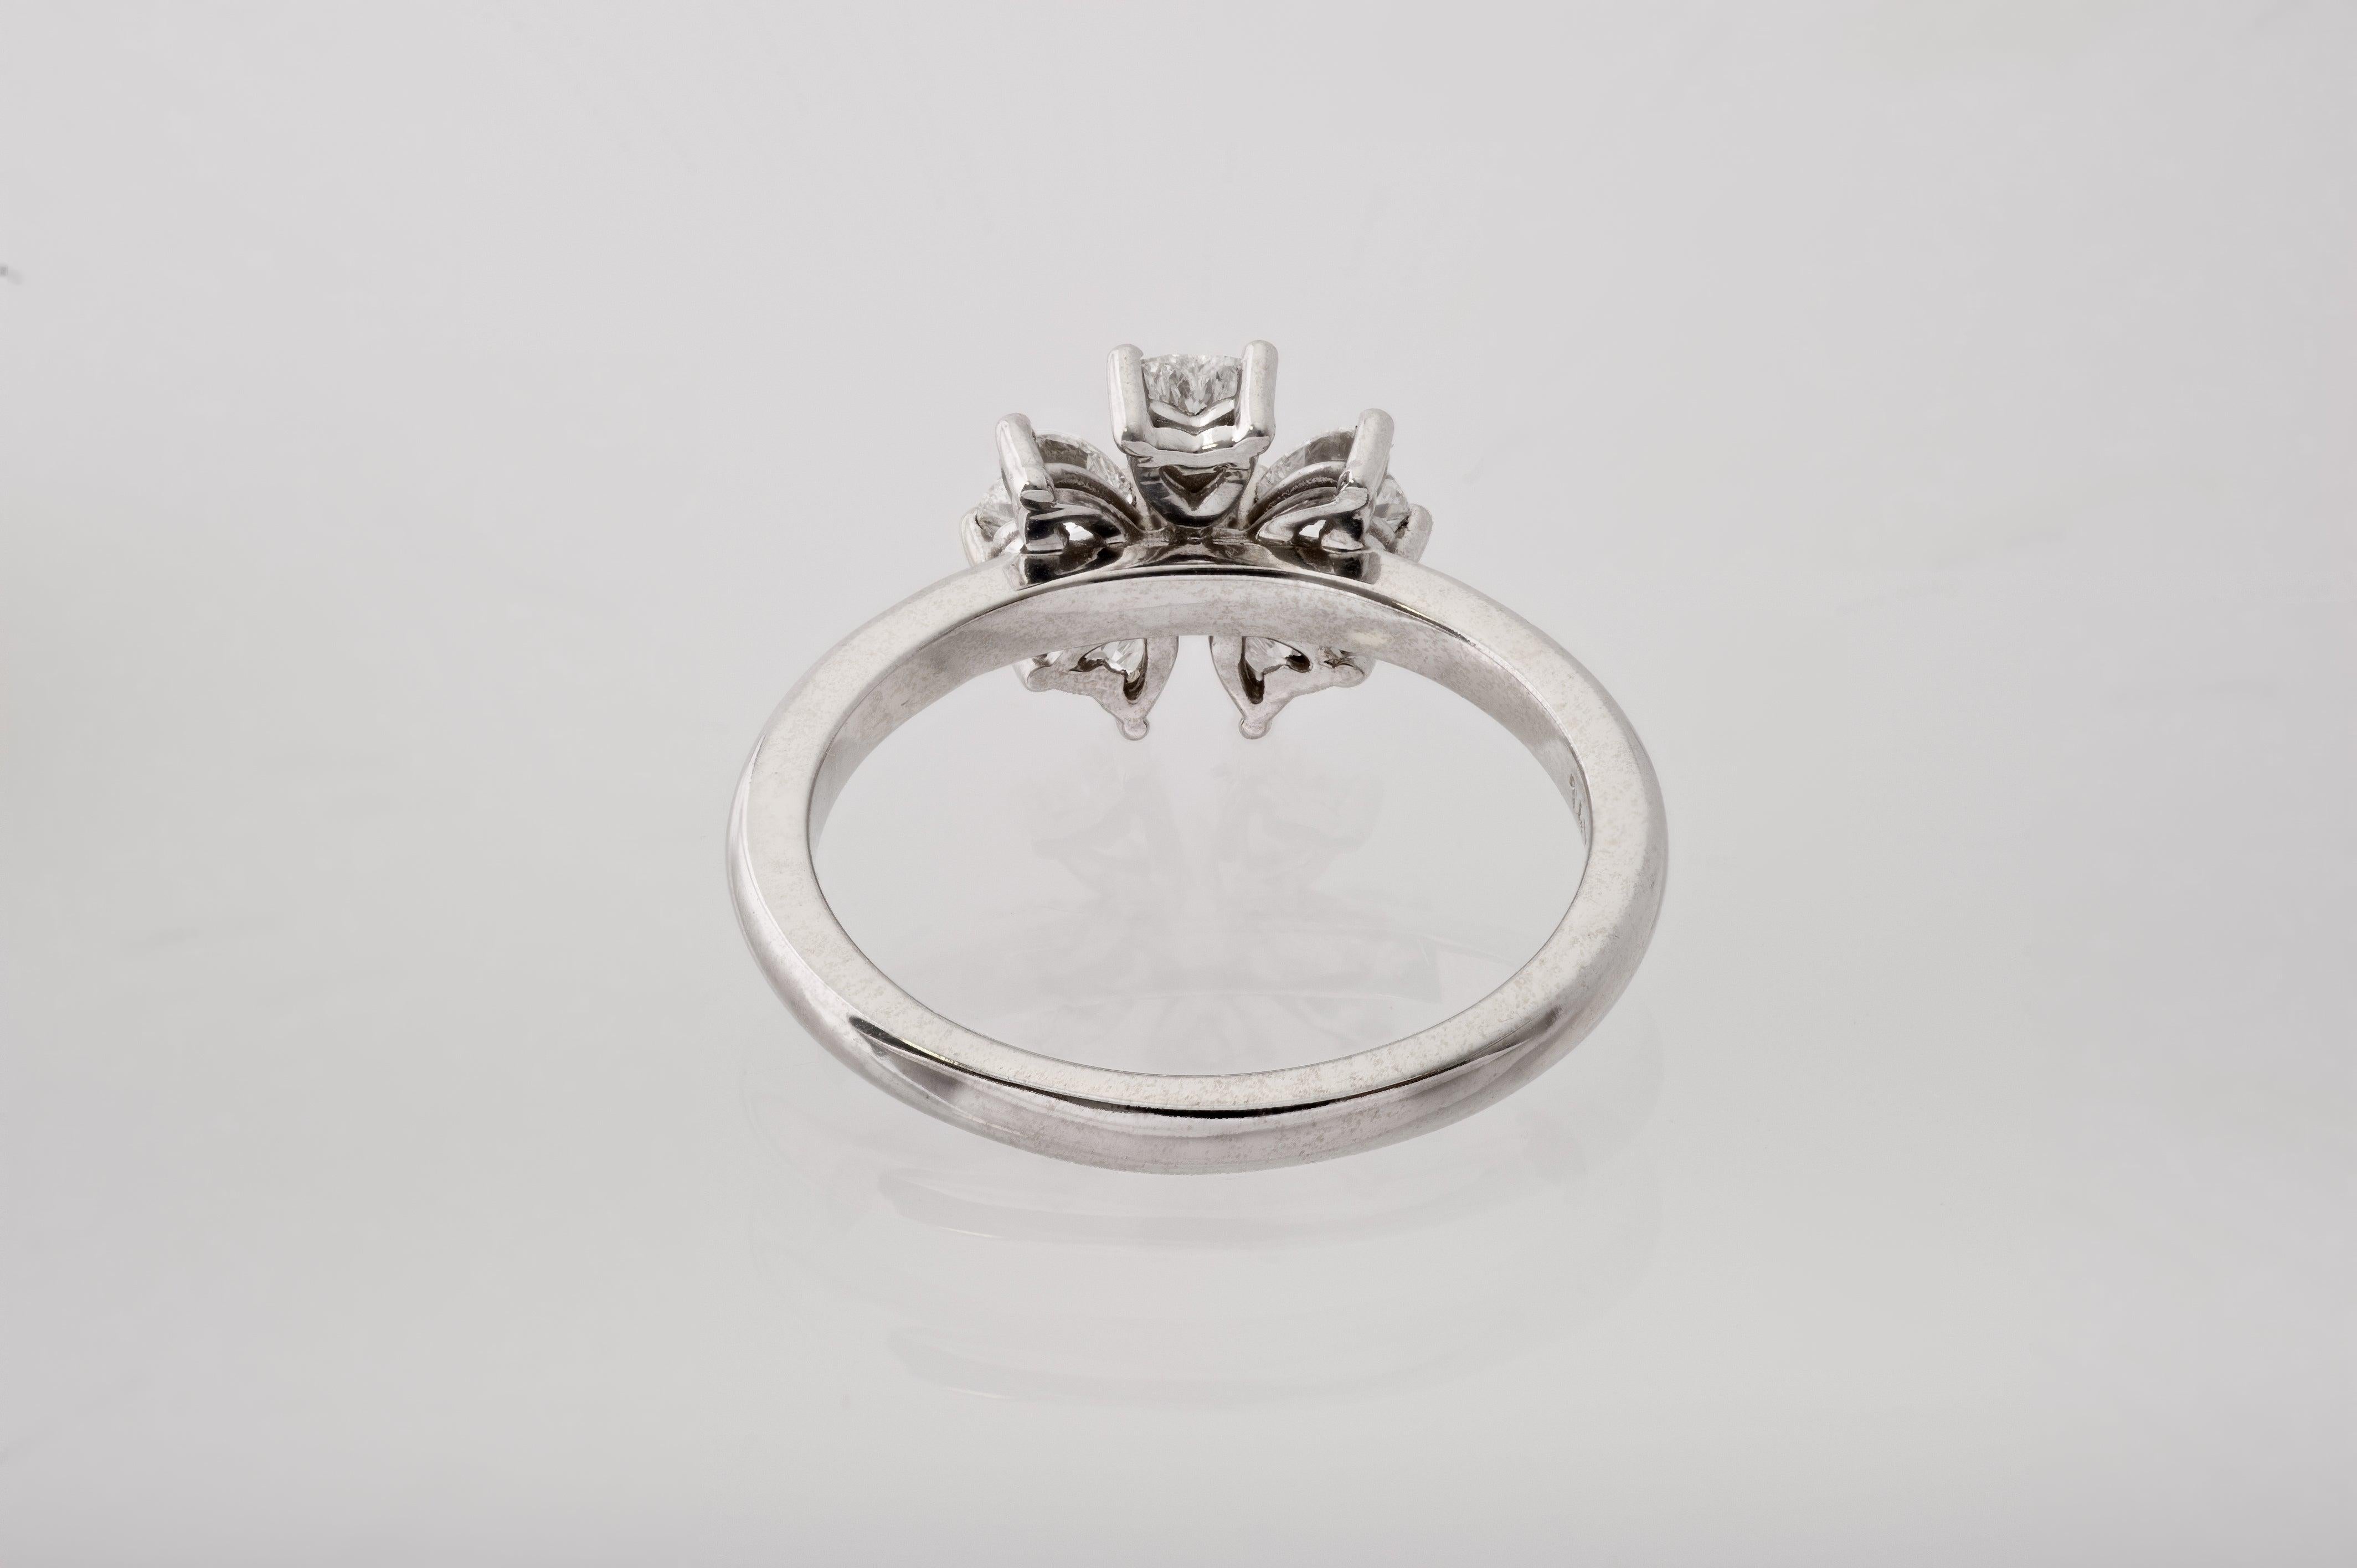 For Sale:  Floral Motif Diamond Ring with Ideal Cut Heart Shaped Diamonds 3